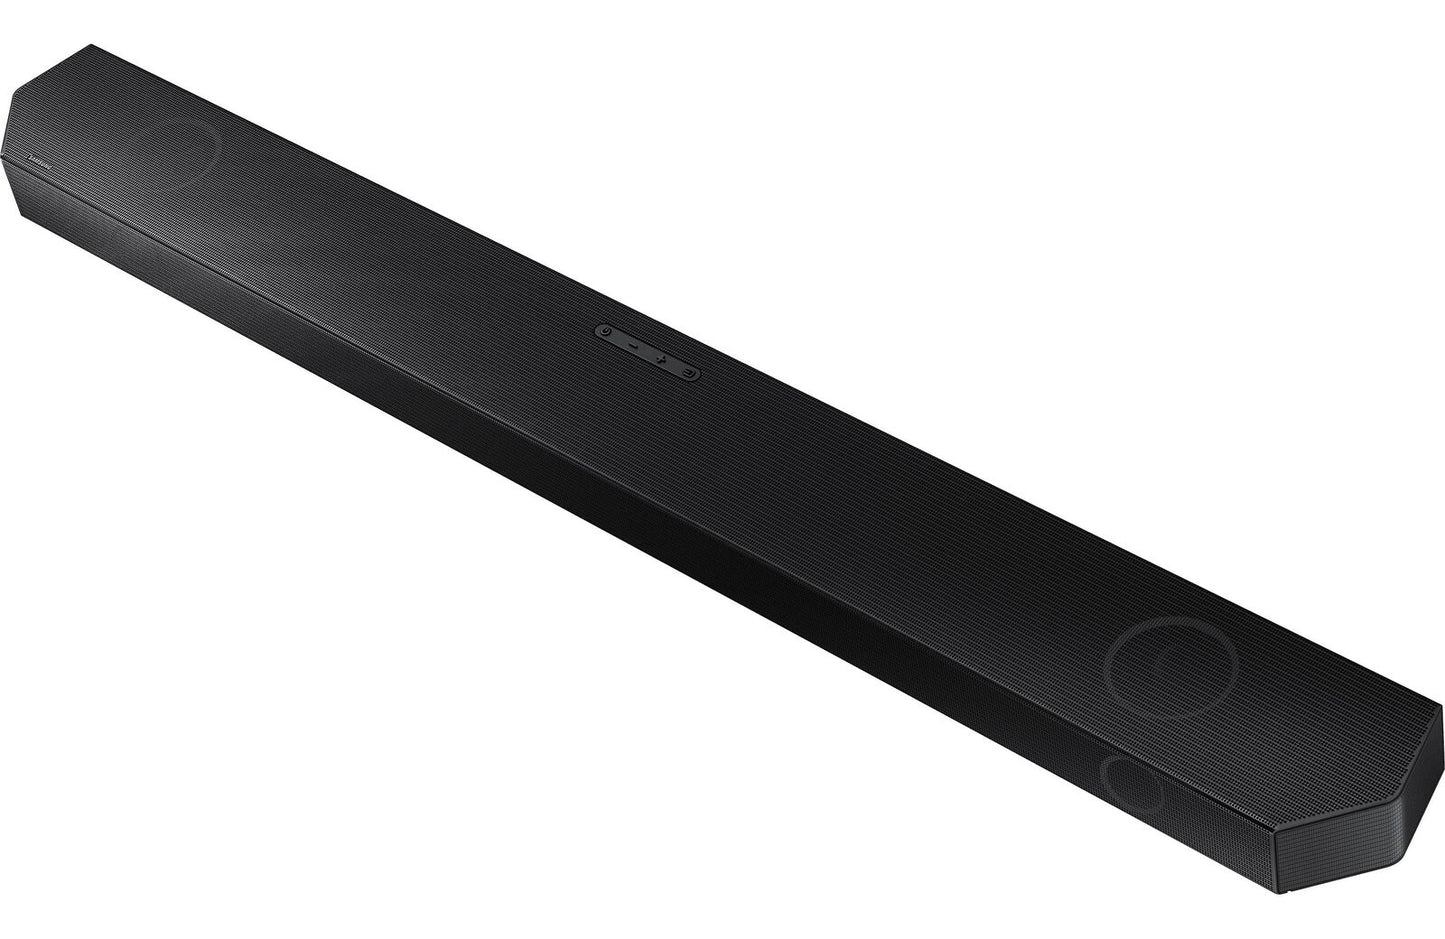 Samsung HW-Q700B Powered 3.1.2-channel sound bar and wireless subwoofer system